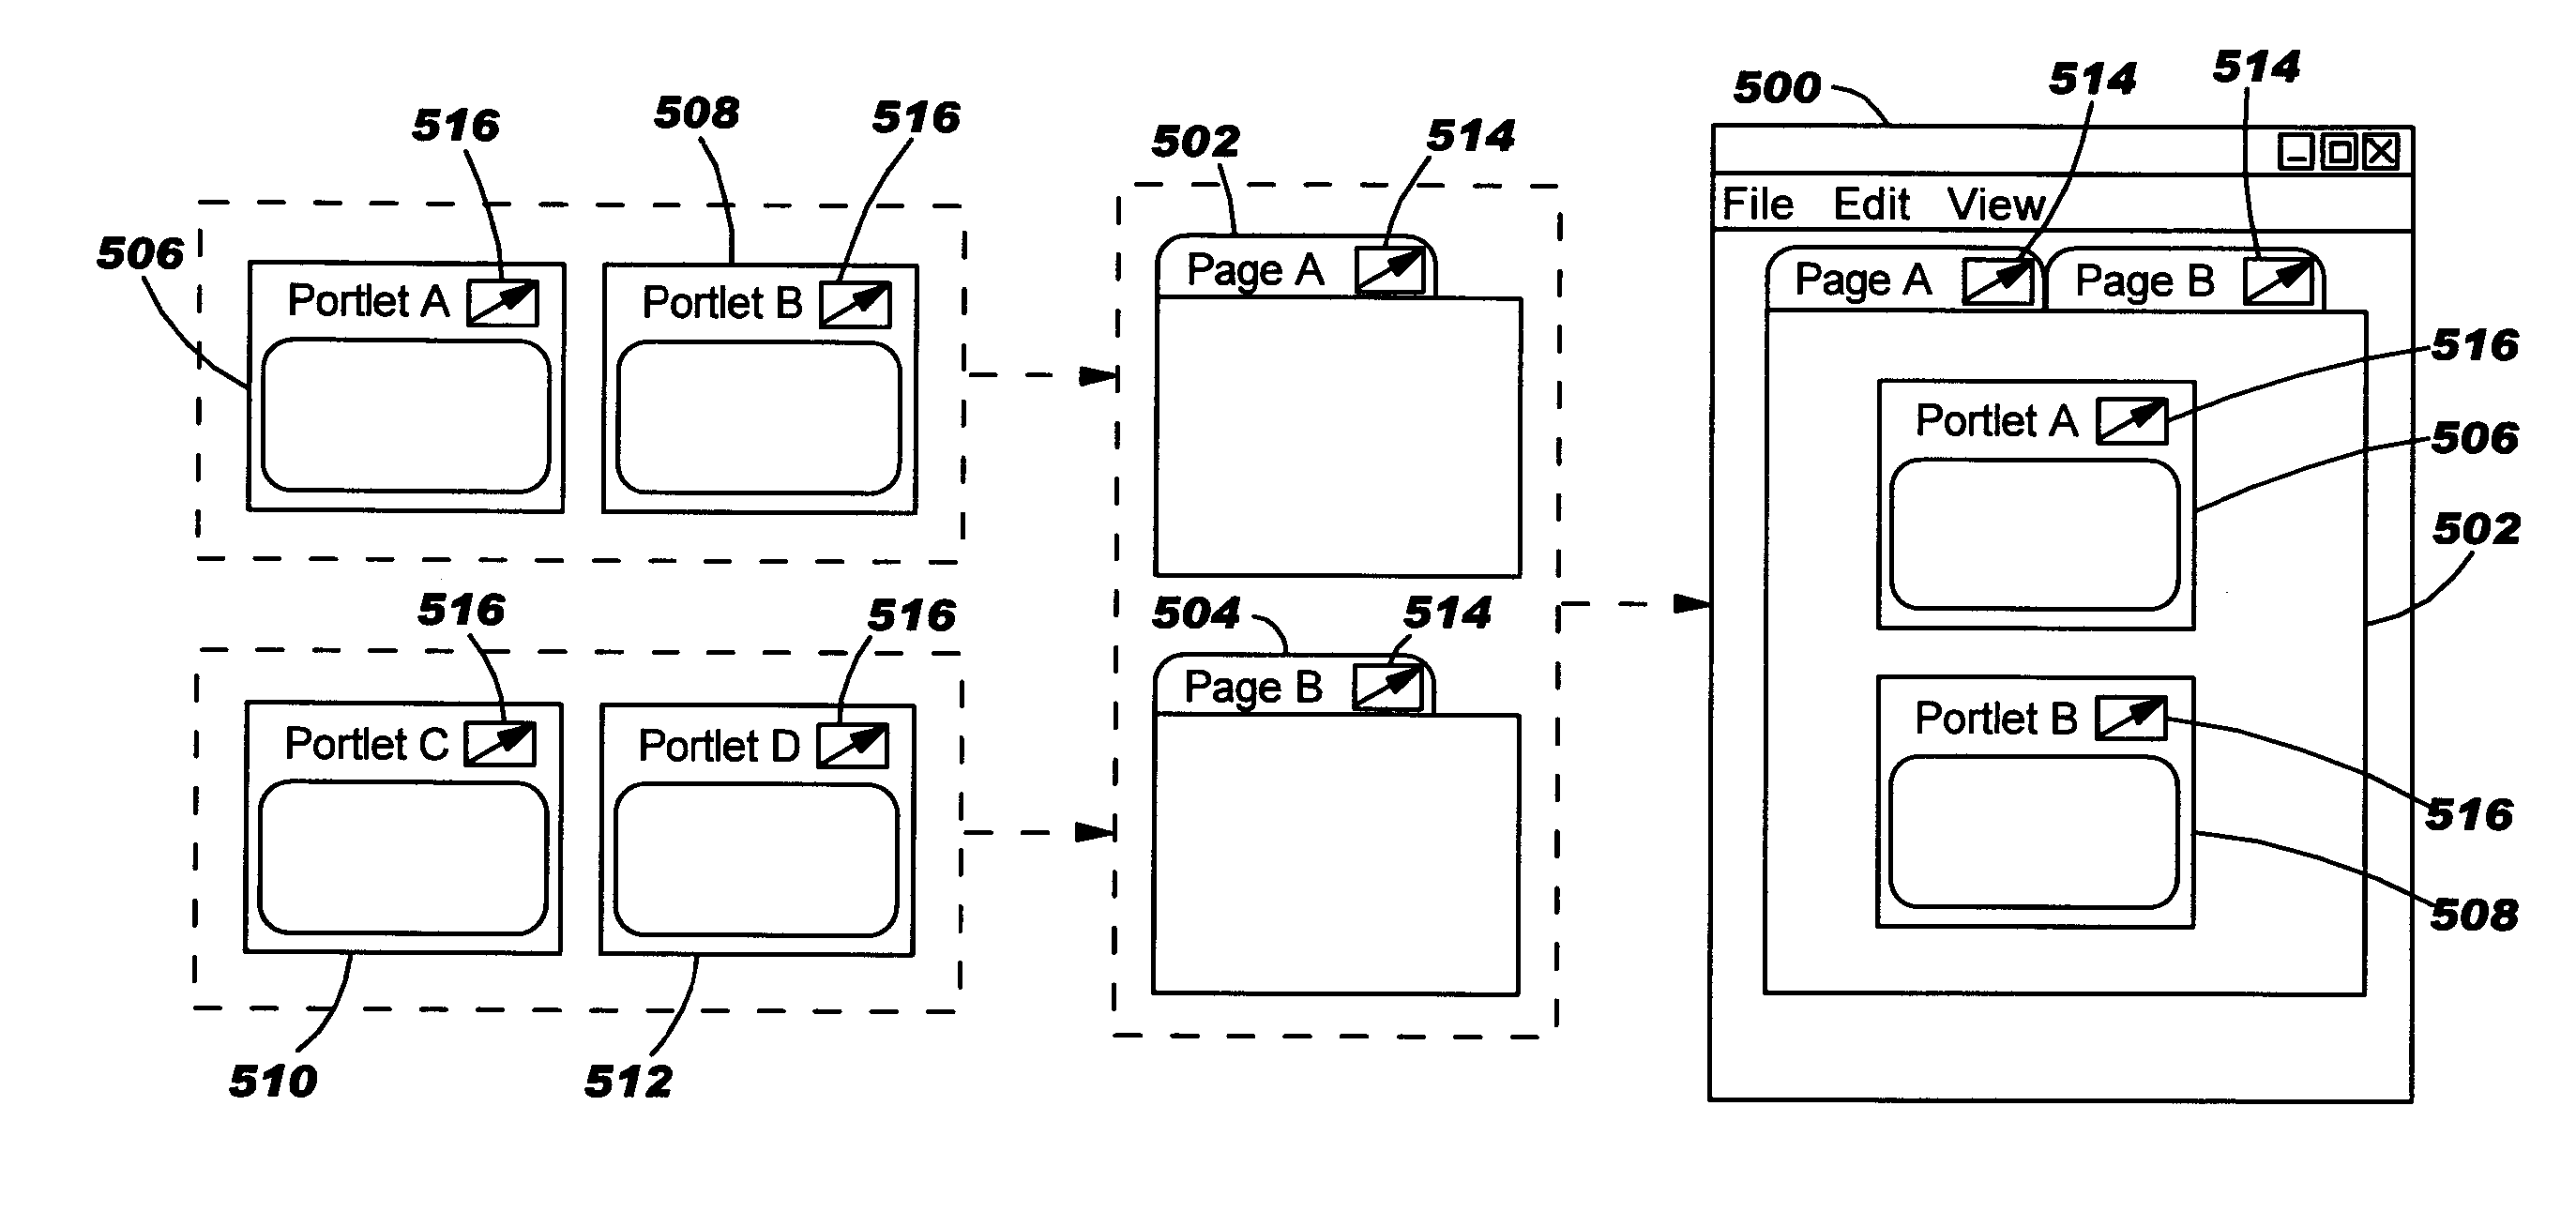 Detachable and reattachable portal pages